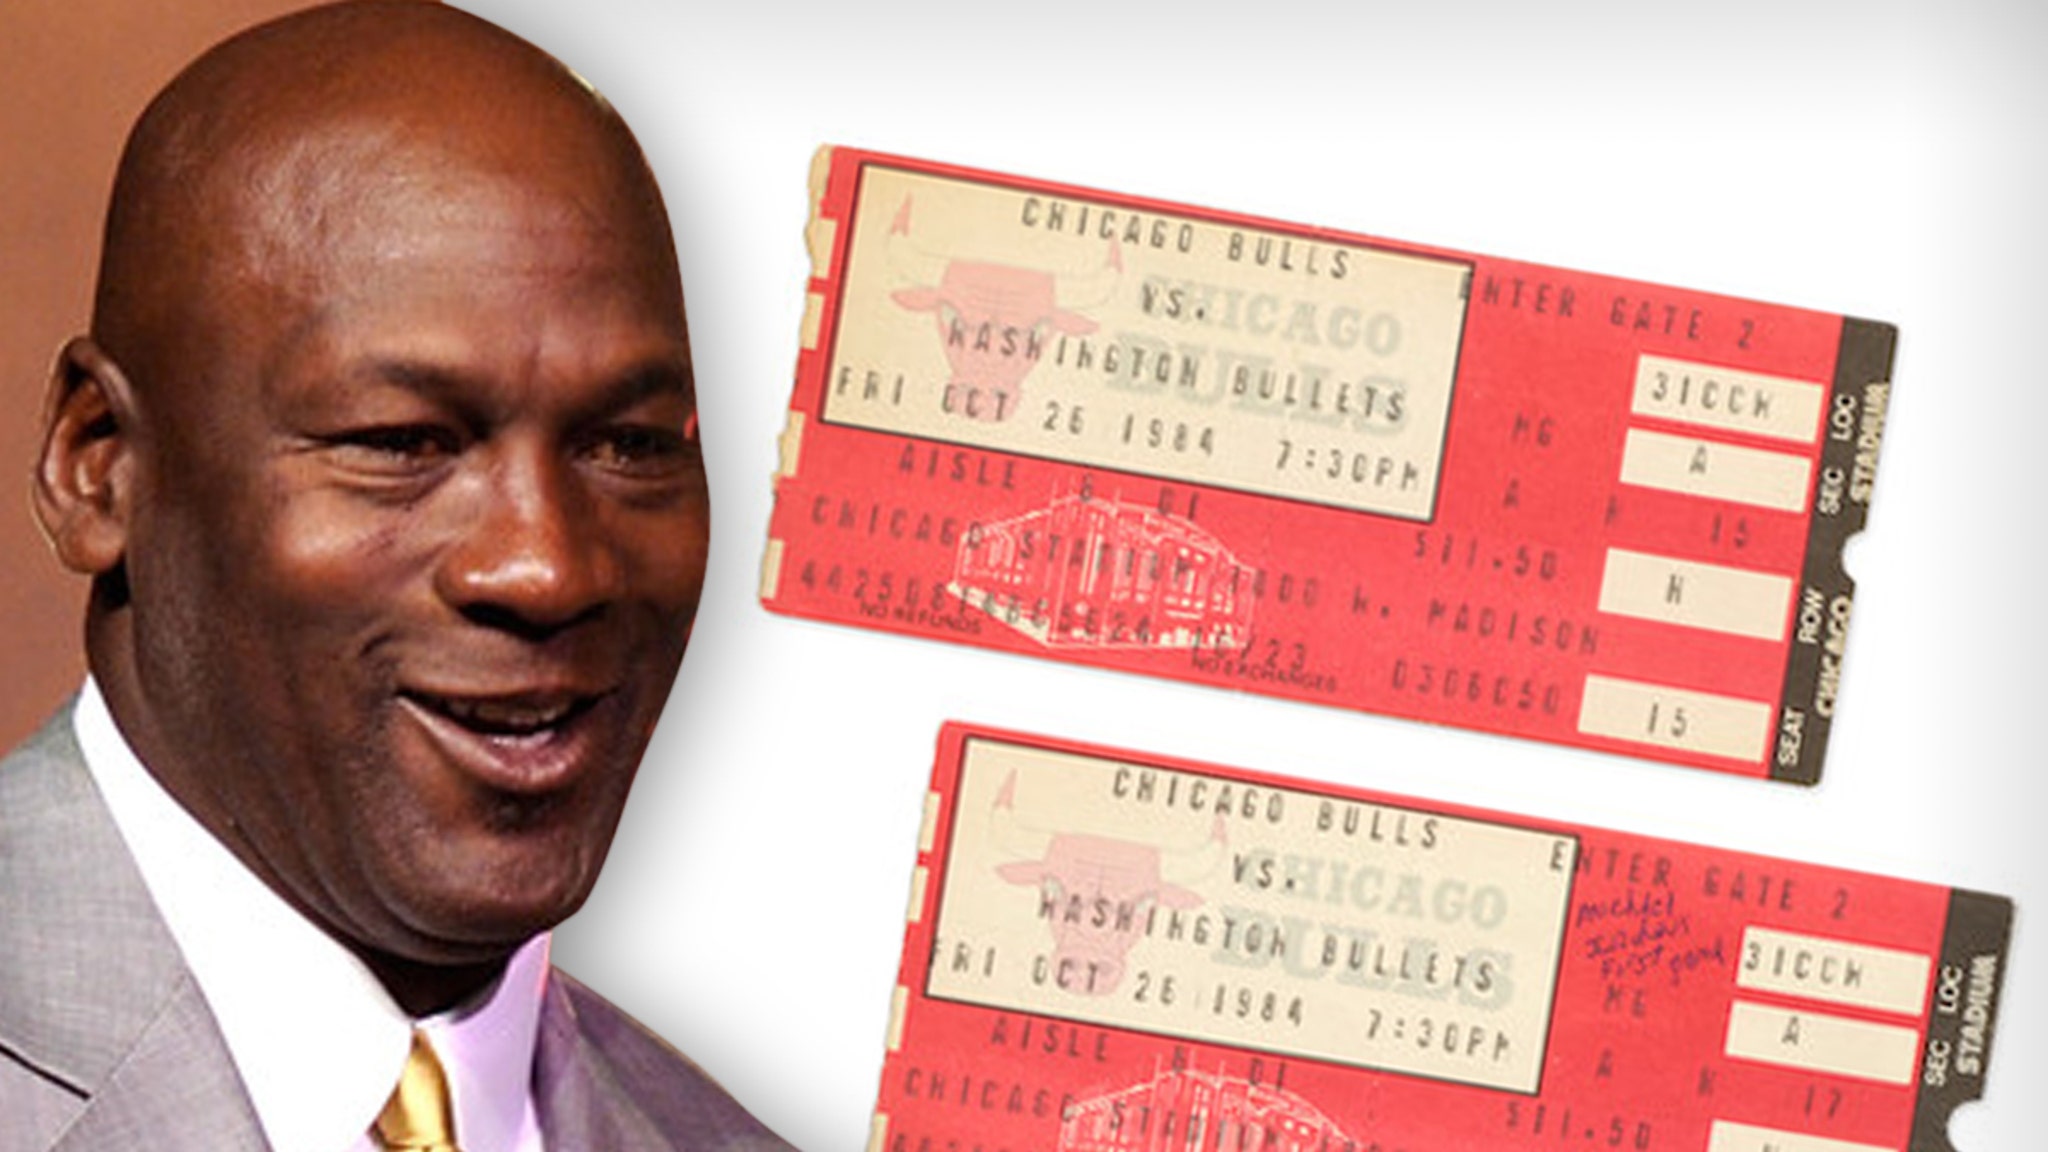 Ticket Stubs For Michael Jordan’s NBA Debut Game Expected To Fetch $300K At Auction